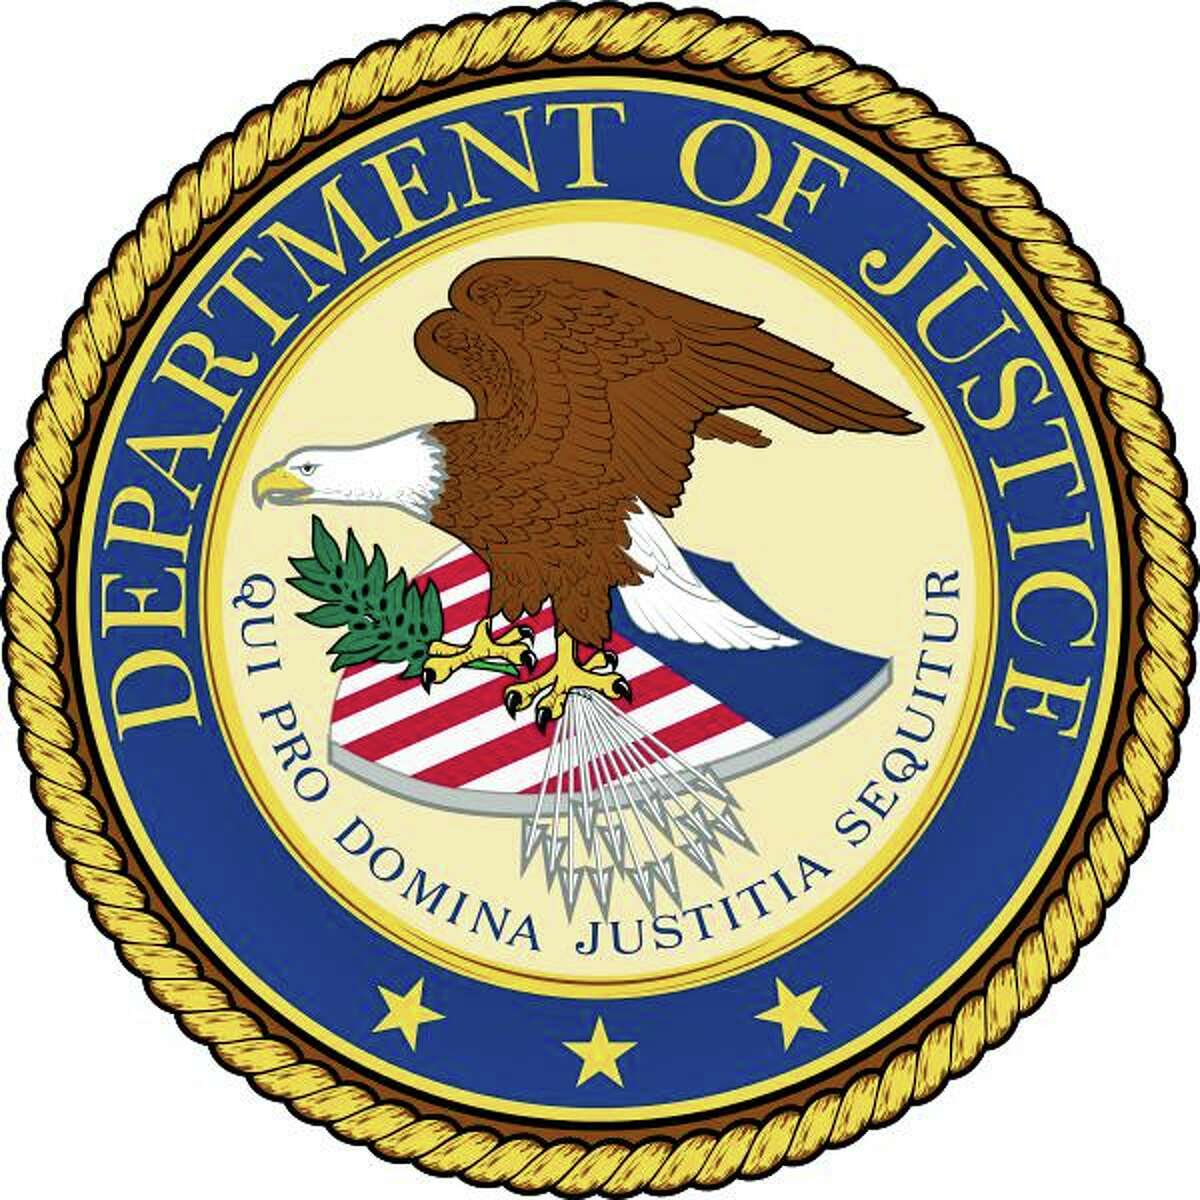 A 24-year-old Bronx, N.Y. man has been indicted for his alleged role in a vehicle-theft ring operating in Connecticut and New York, federal prosecutors announced on Tuesday, Dec. 29, 2020. Josepher Y. Cartagena is accused of being a member of a group, which is believed responsible for the theft of more than 40 vehicles in Connecticut, New York and elsewhere.